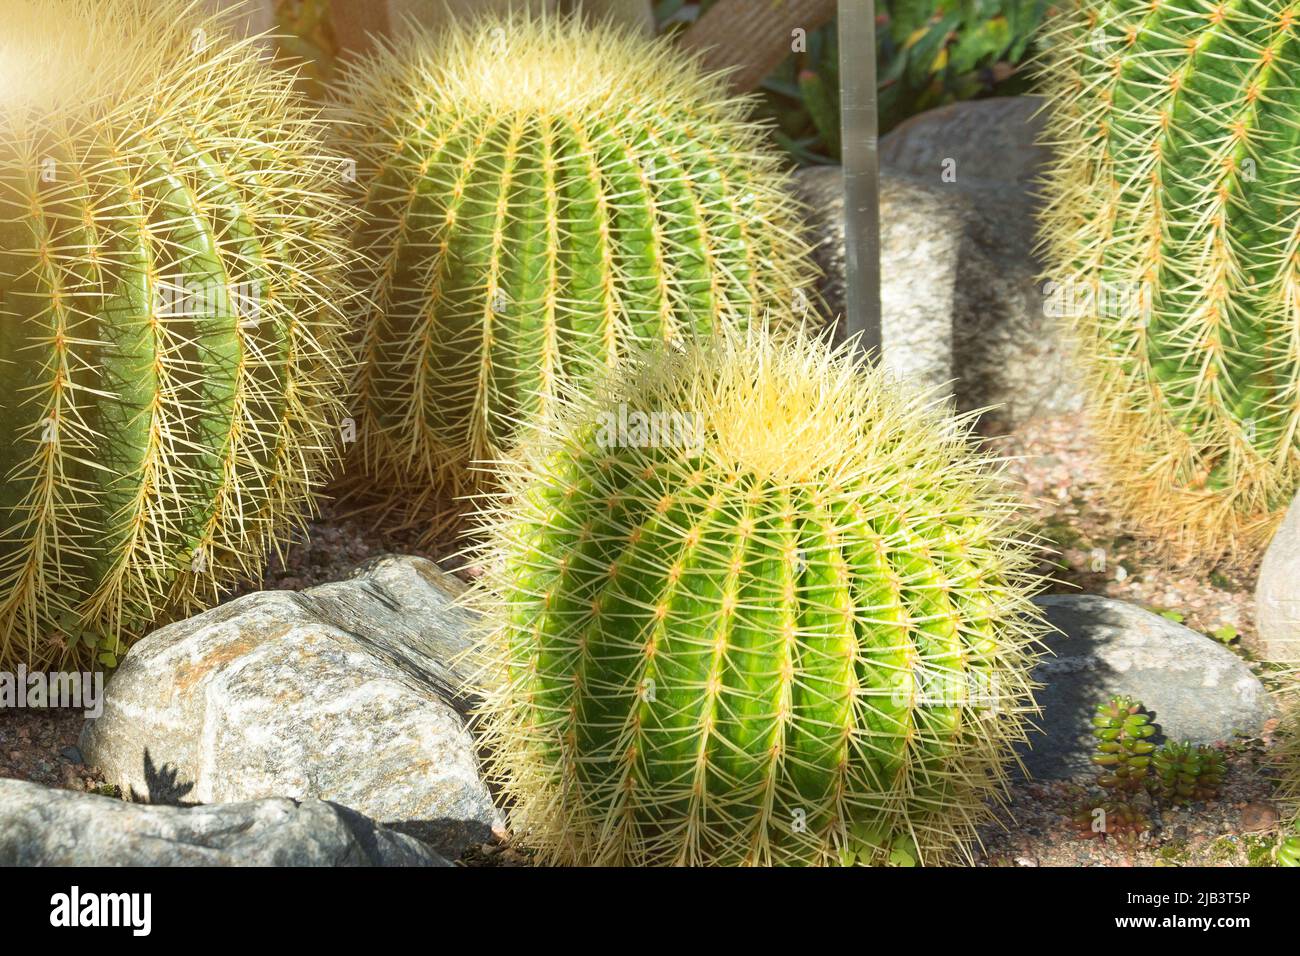 Several large round cacti in the greenhouse. Stock Photo